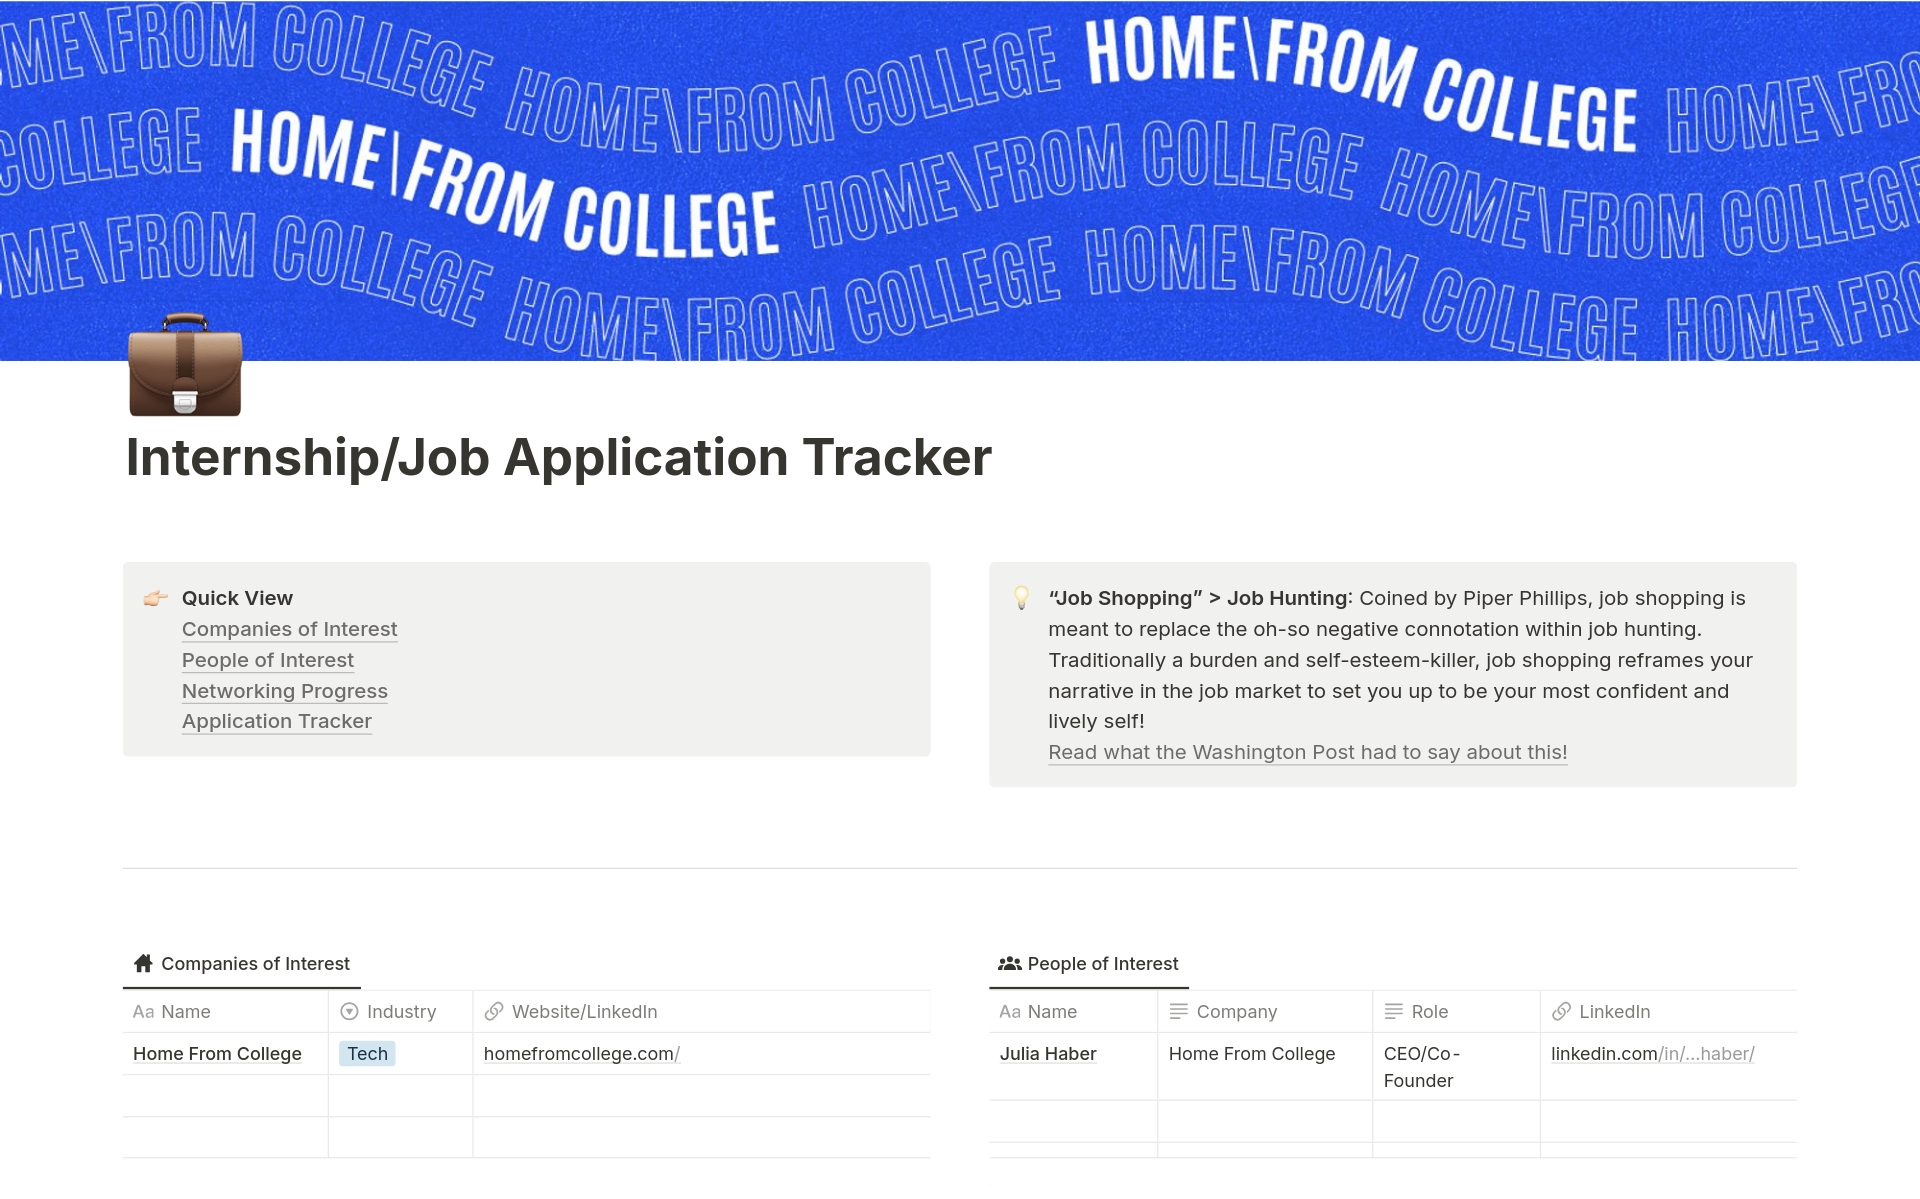 The Home From College's Internship/Job Application Tracker is a comprehensive template designed to help students organize and track their internship and job applications efficiently. 